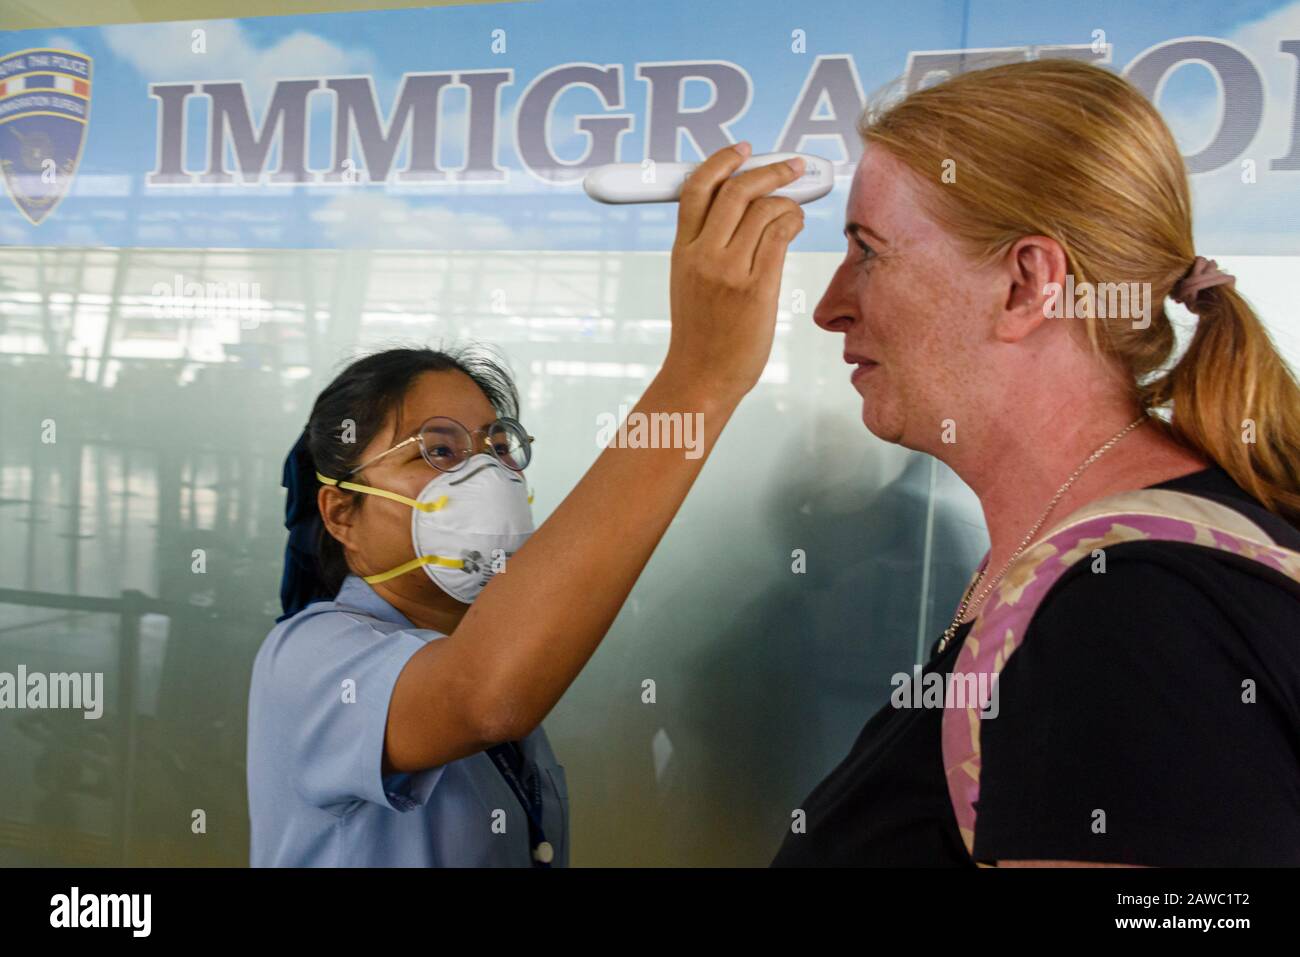 Phuket Airport, Thailand. 31 January 2020.  A member of security staff wears a surgical masks as she screens passengers with aforehead thermometer, in an attempt to prevent the spread of 2019-nCoV COVID-19 COVID 2019 nCoV Coronavirus Corona Virus during the current epidemic. Stock Photo